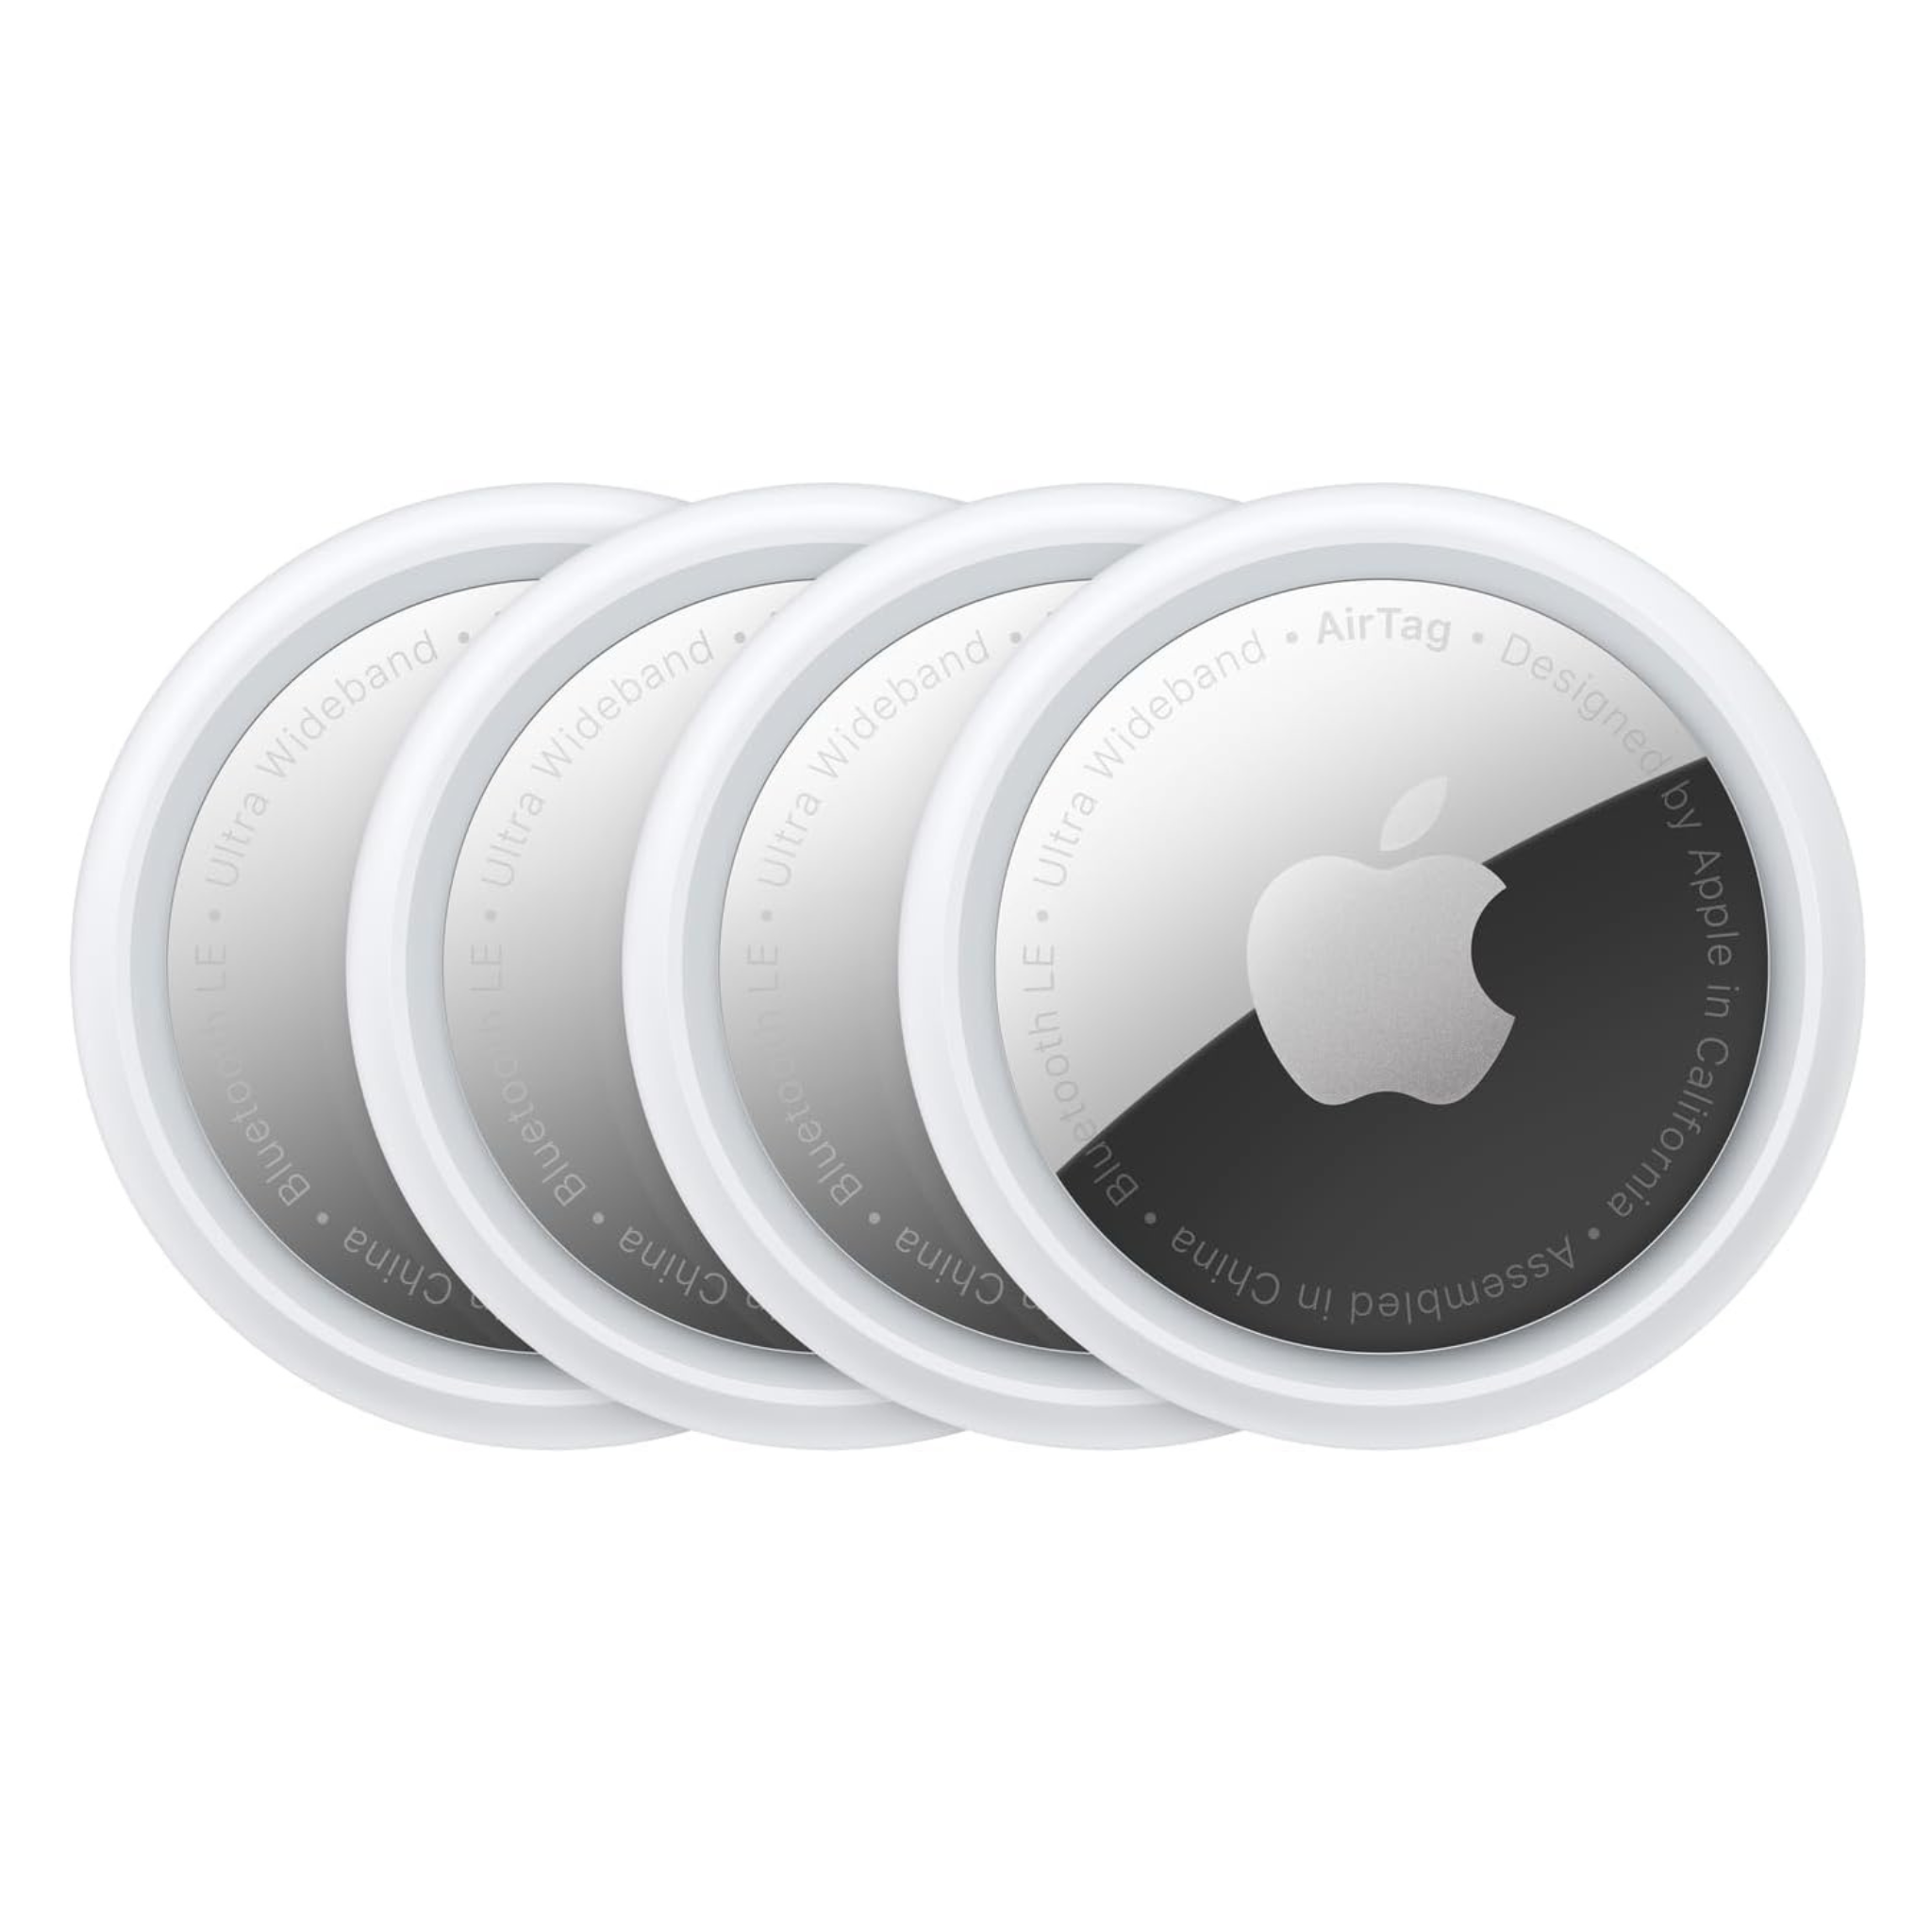 4 Pack Apple Airtags, Must Have For Tracking Luggage